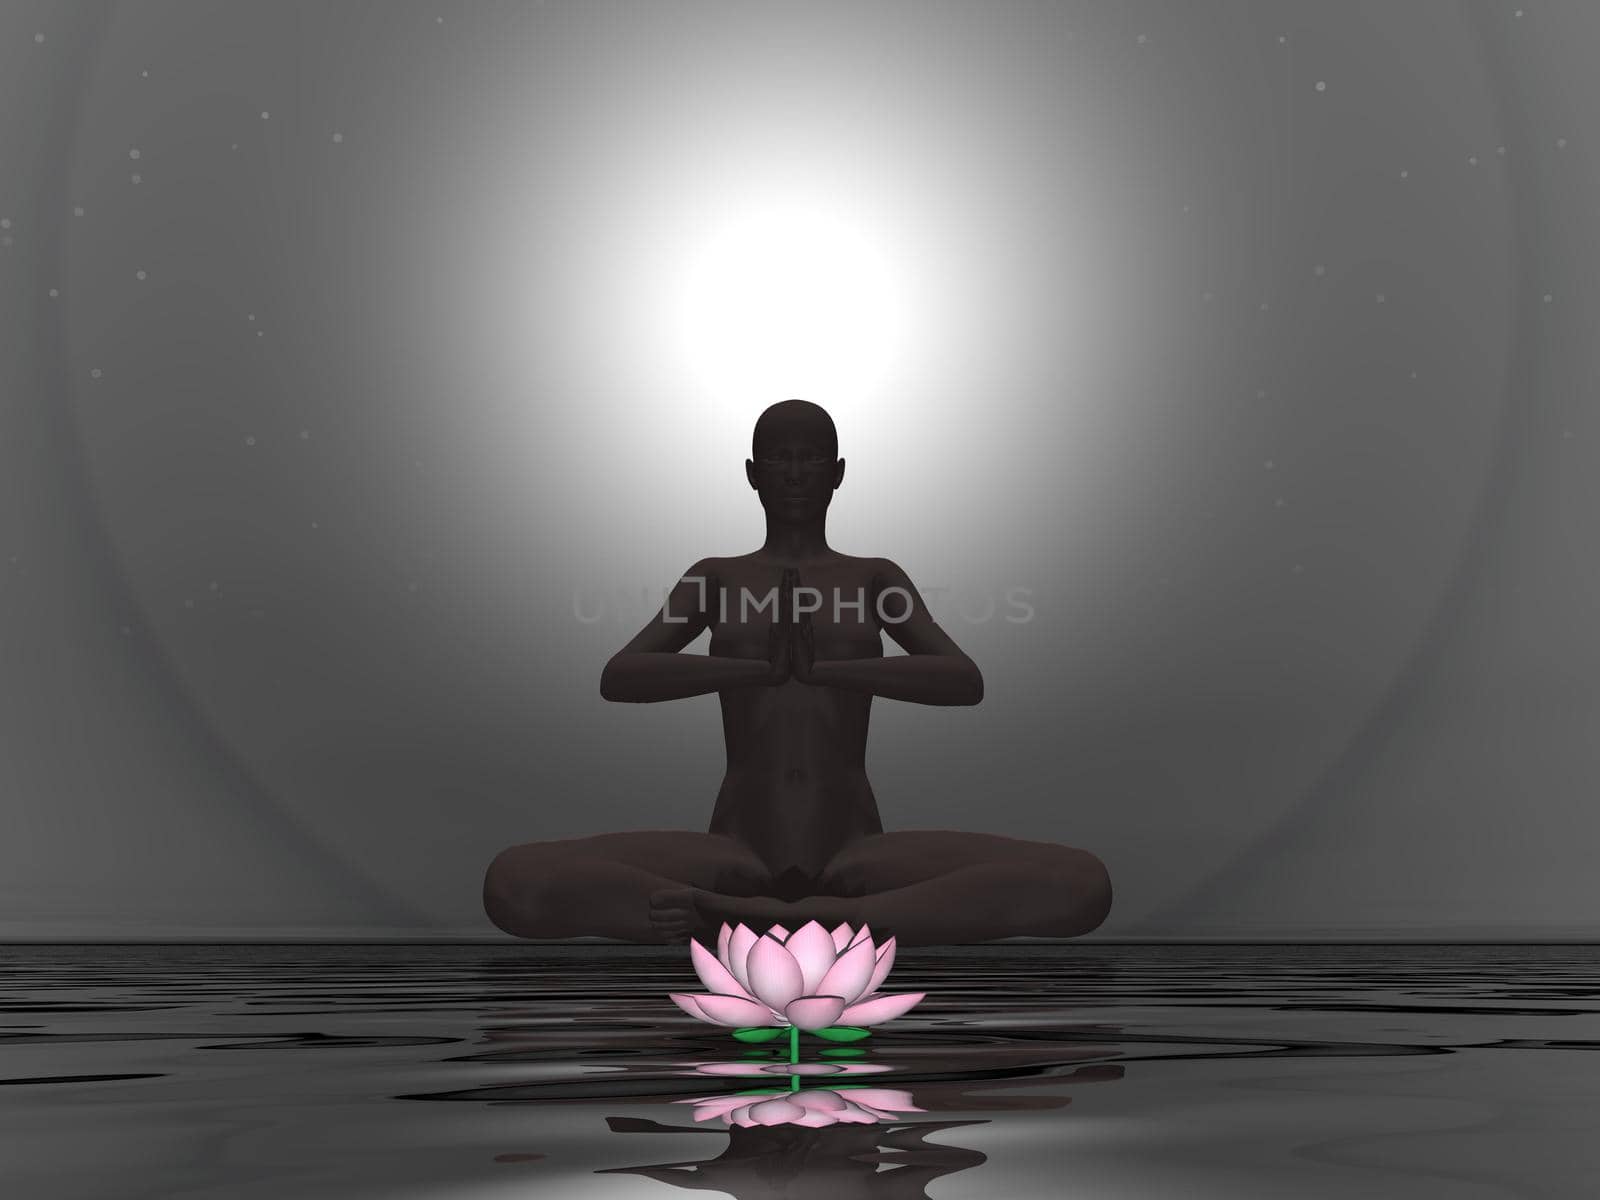 Beautiful pink water lily and silhouette of a man meditating in dark background